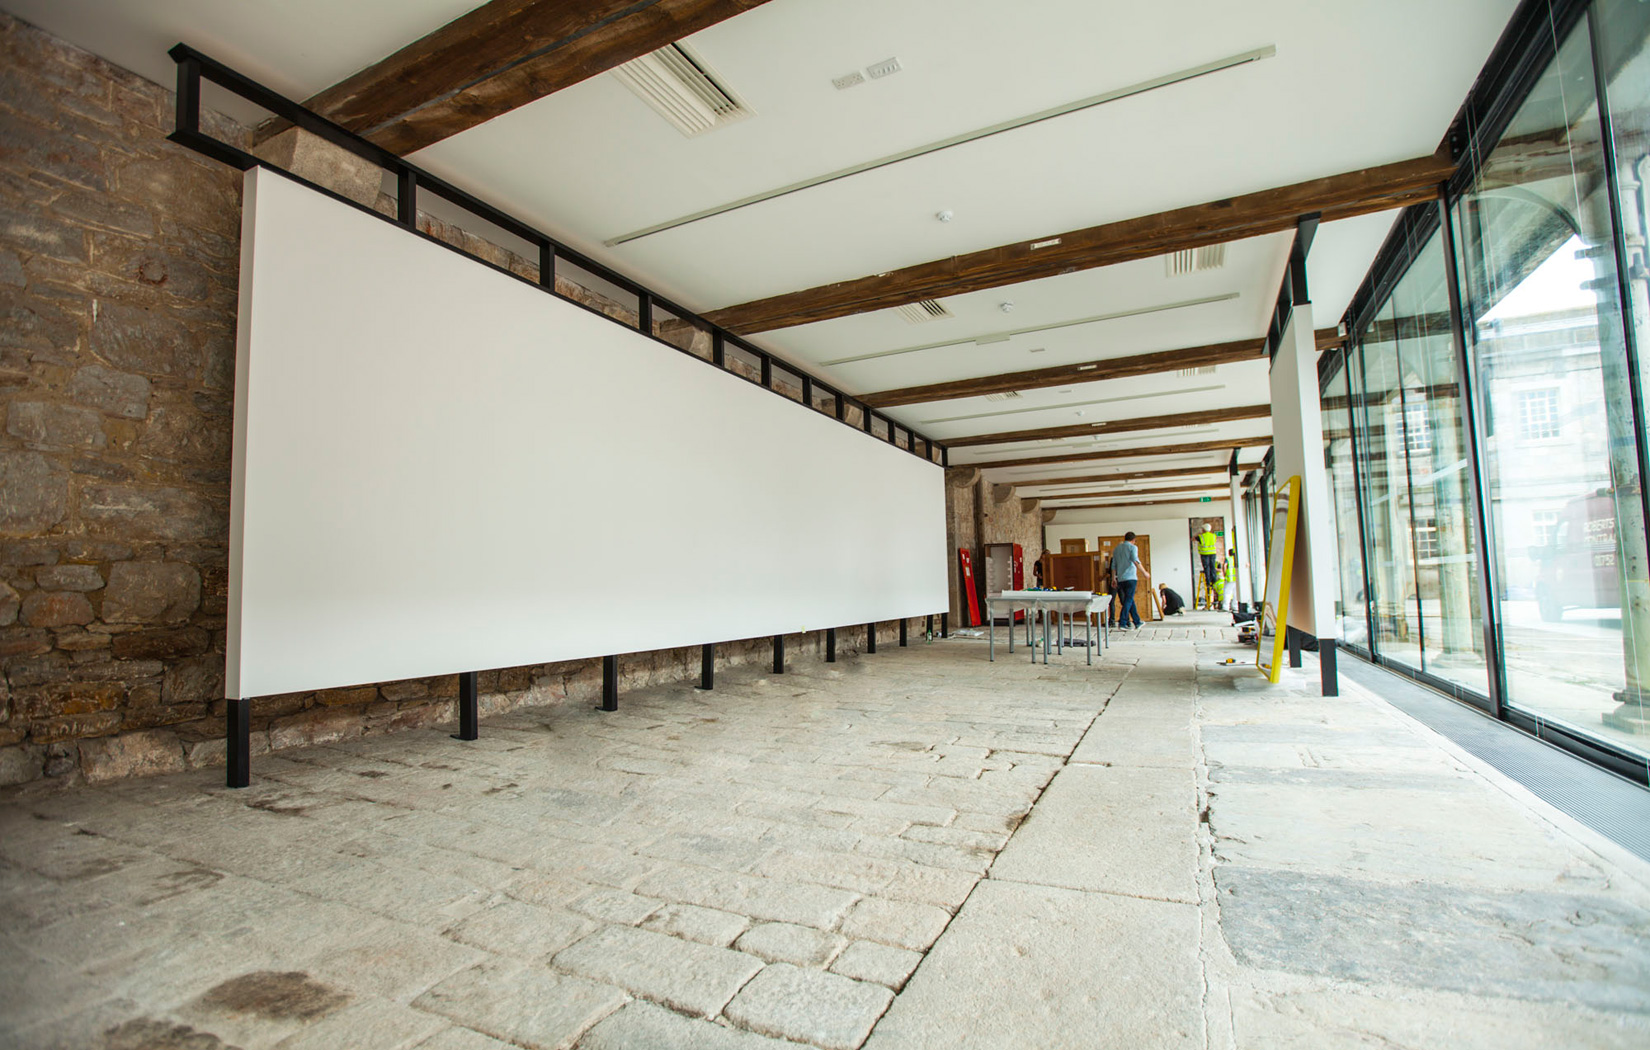 The nearly complete gallery space. Photography Rod Gonzales